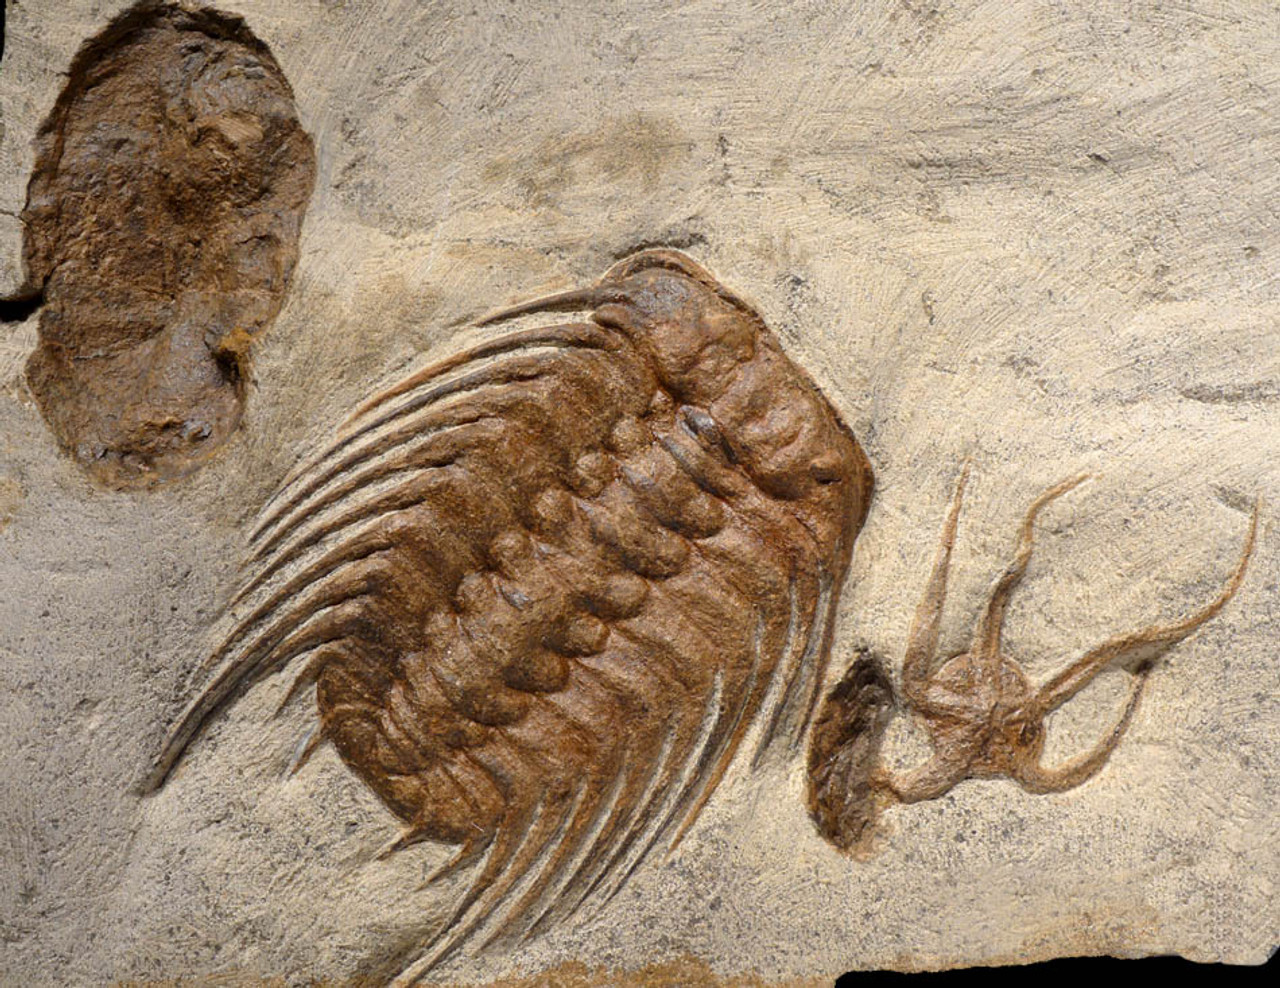 NATURAL ORDOVICIAN OCEAN LIFE FOSSIL WITH LARGE SELENOPELTIS TRILOBITE, STARFISH AND BIVALVE *TRX272